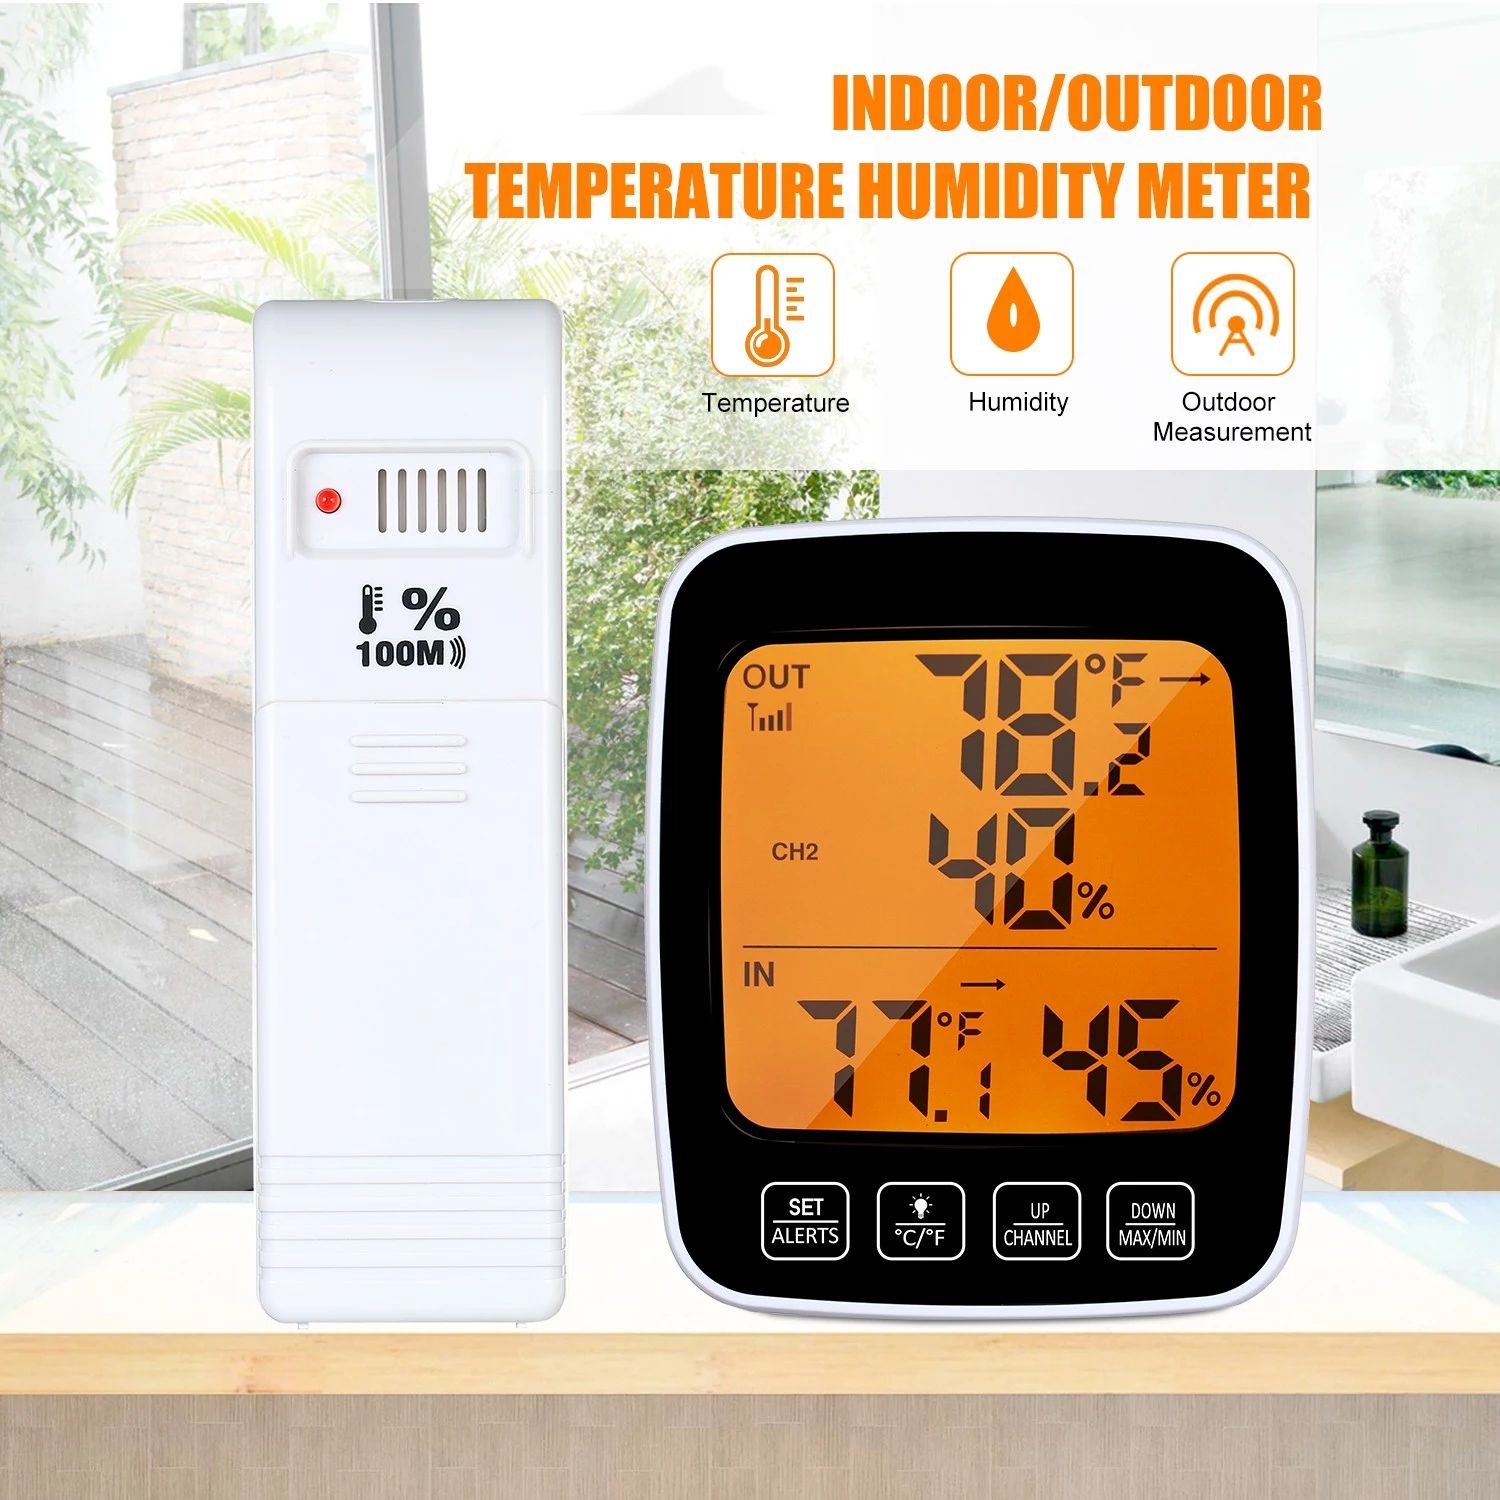 Digital-Temperature-amp-Humidity-Meter-Thermo-hygrometer-degCdegF-Thermometer-Hygrometer-1616470